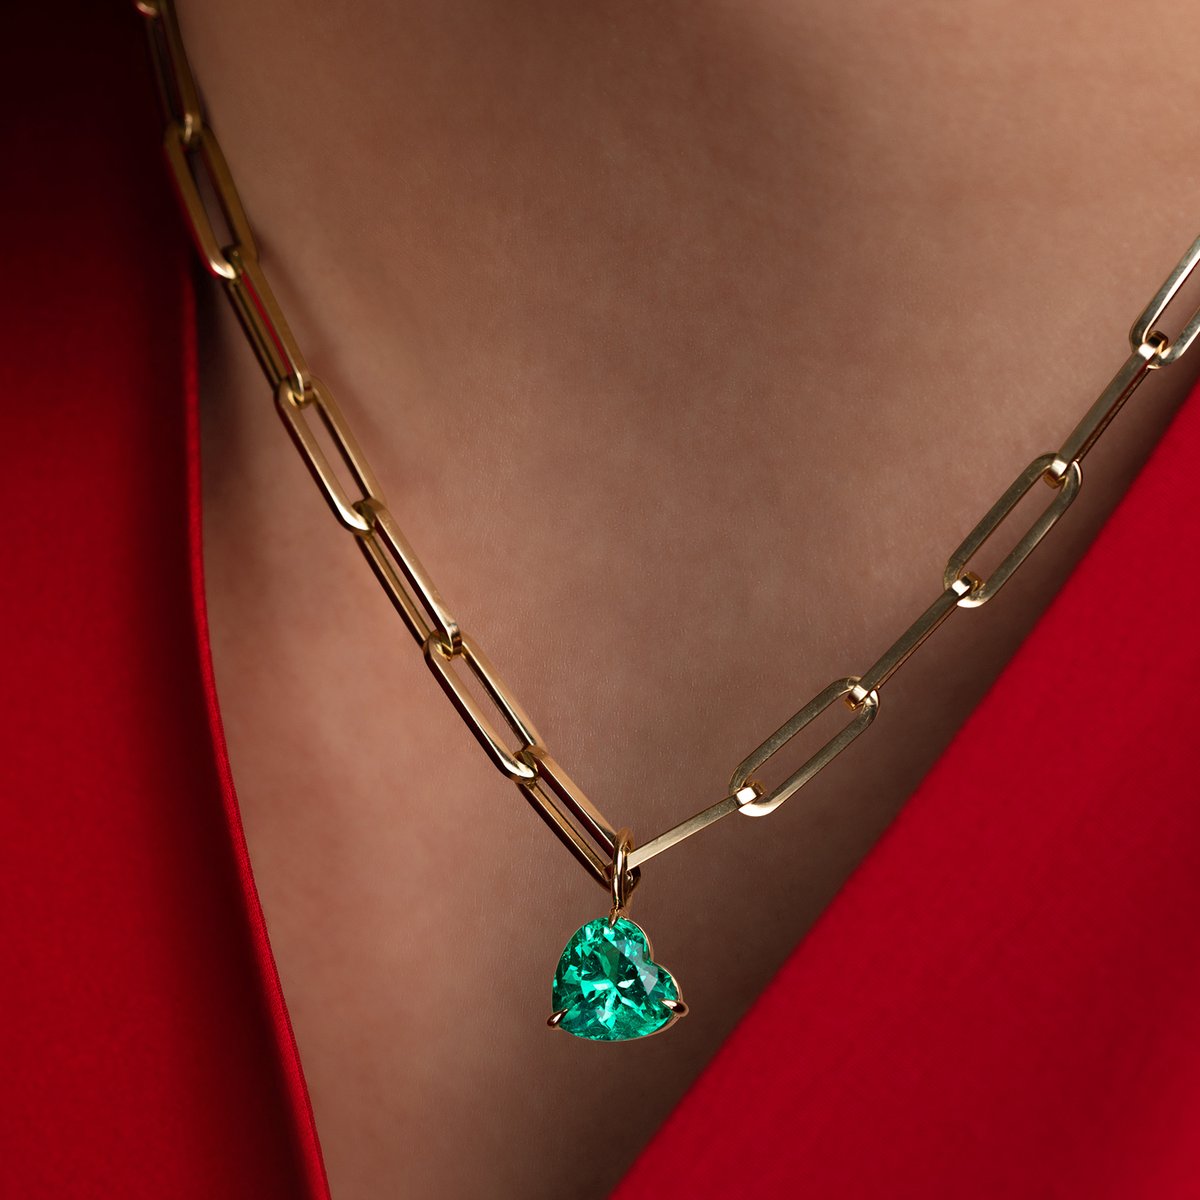 My kryptonite is one of a kind gems.
.
GIA Certified 4.54ct Columbian Emerald Heart on 18k yellow gold Paperclip Chain
.
#paperclipchain #emeraldnecklace #customjewelrydesign #houstonjewelrydesigner #womanowned #ilasodhani